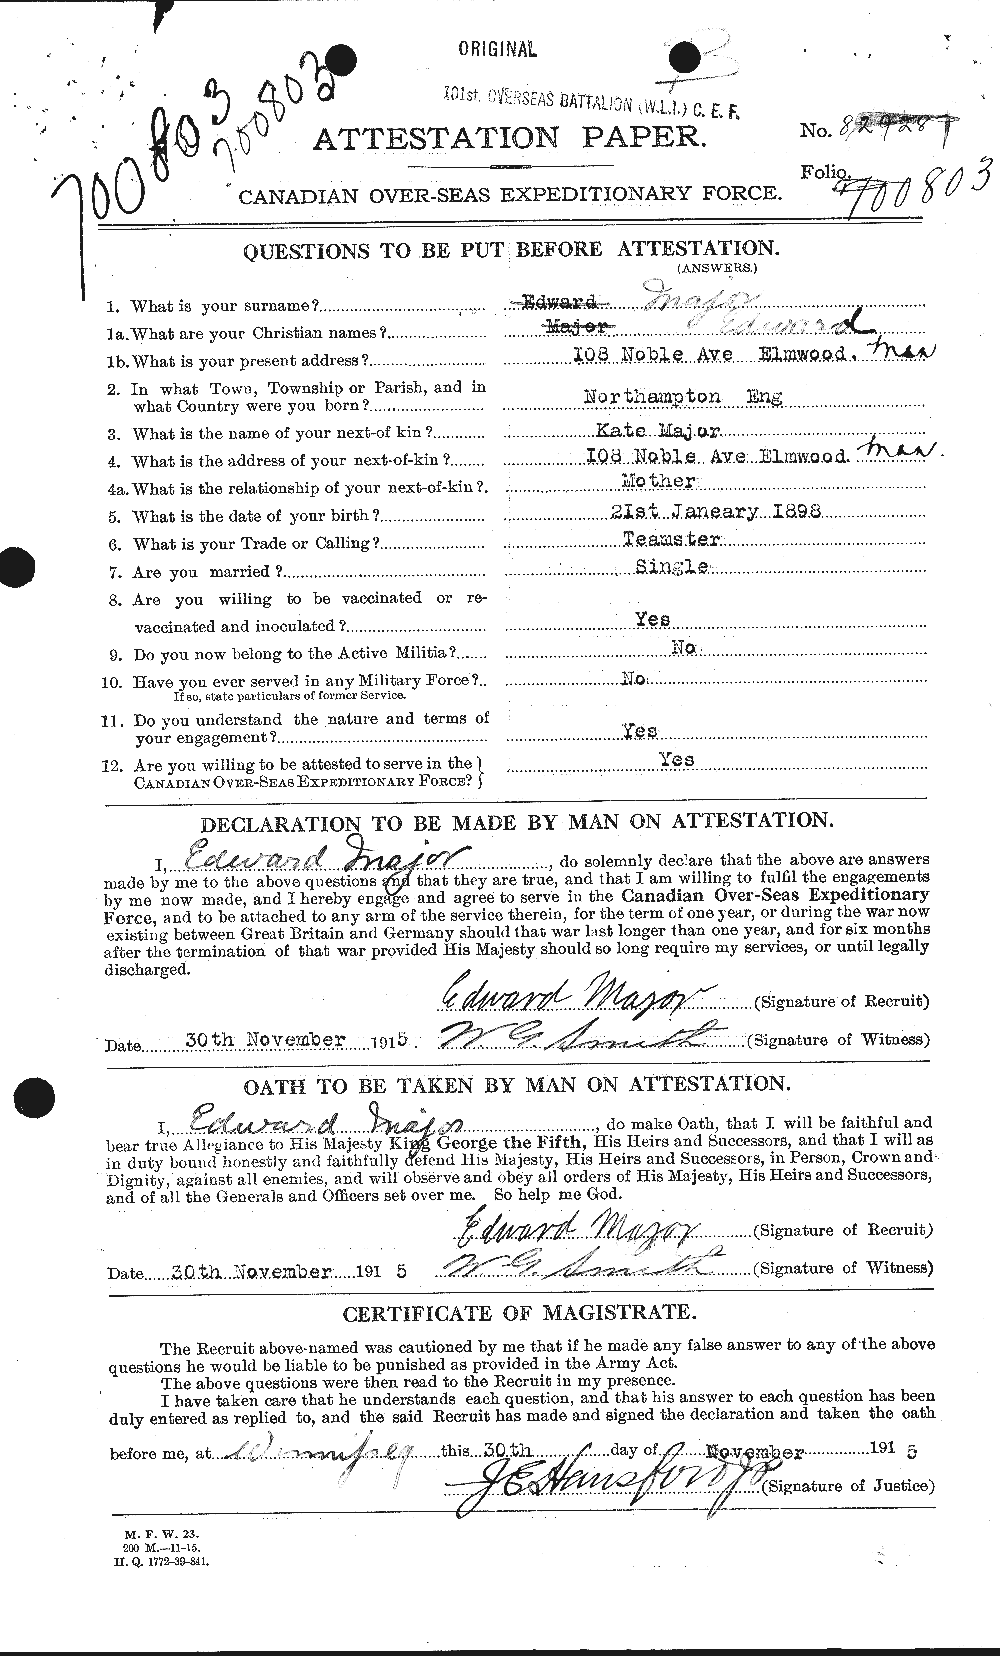 Personnel Records of the First World War - CEF 477824a